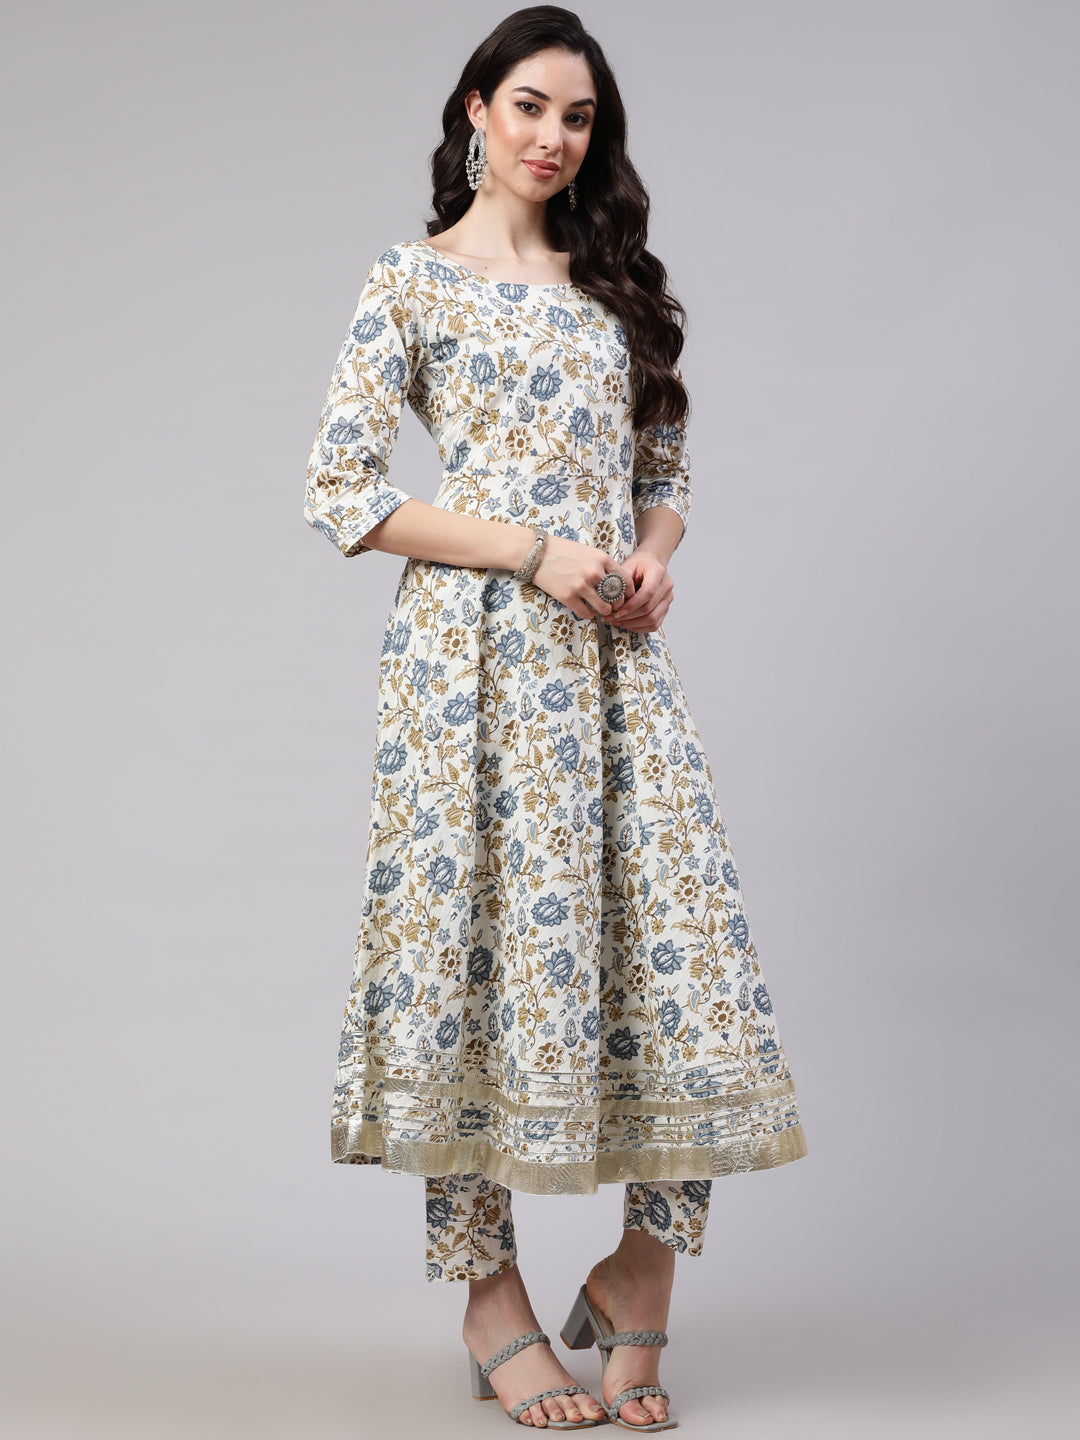 Women's Off-White Floral Printed Flared Kurta With Trouser And Dupatta - Taantav